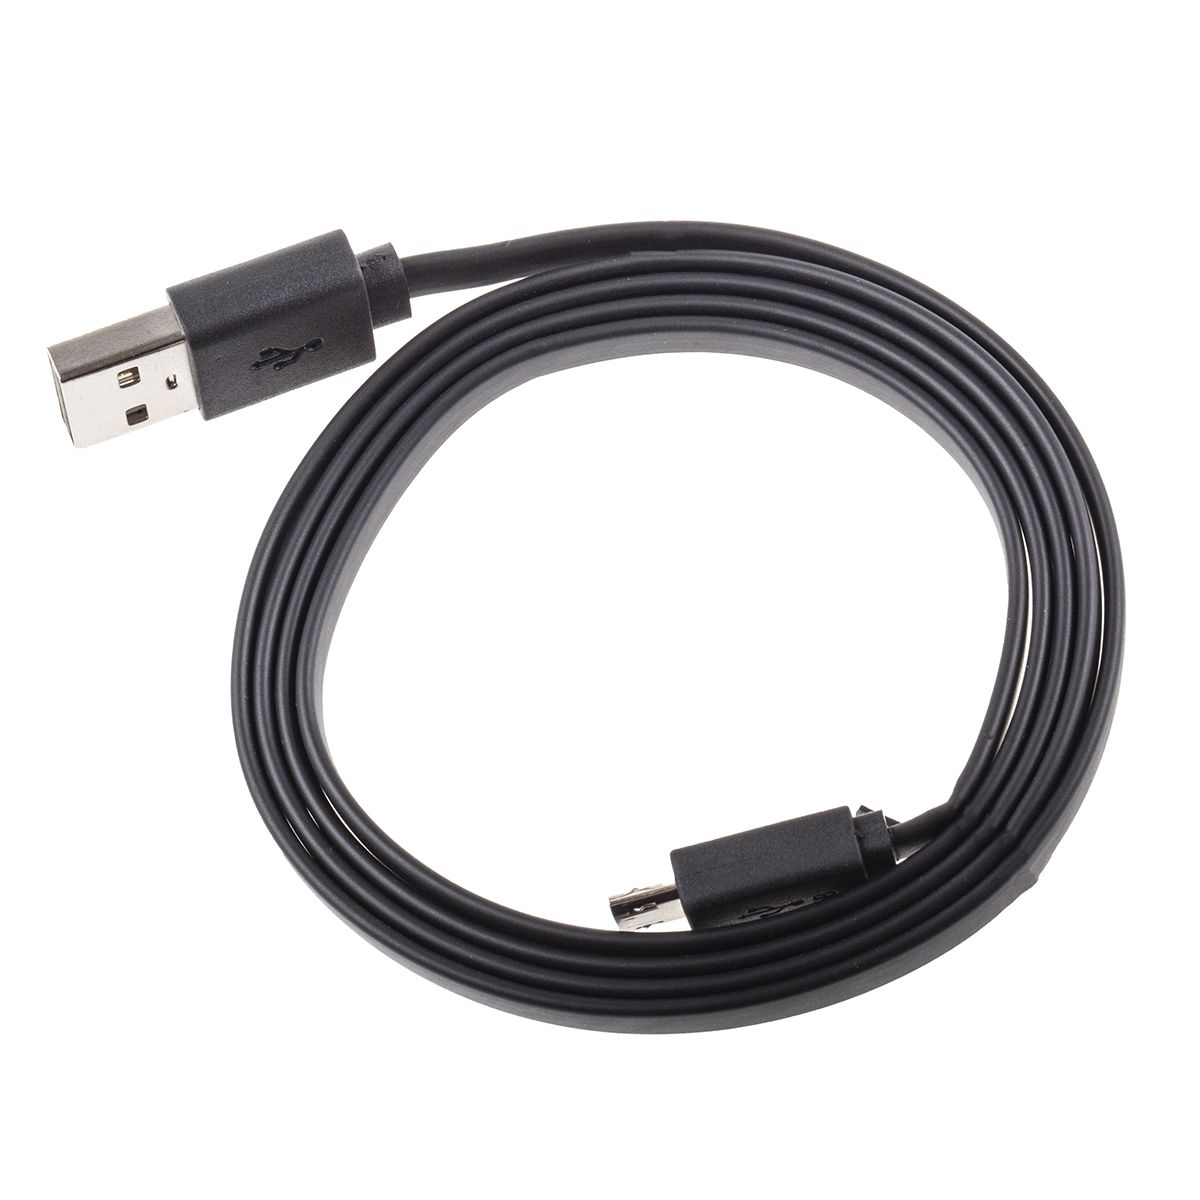 Roline Male USB A to Male Micro USB B  Cable, USB 2.0, 1m